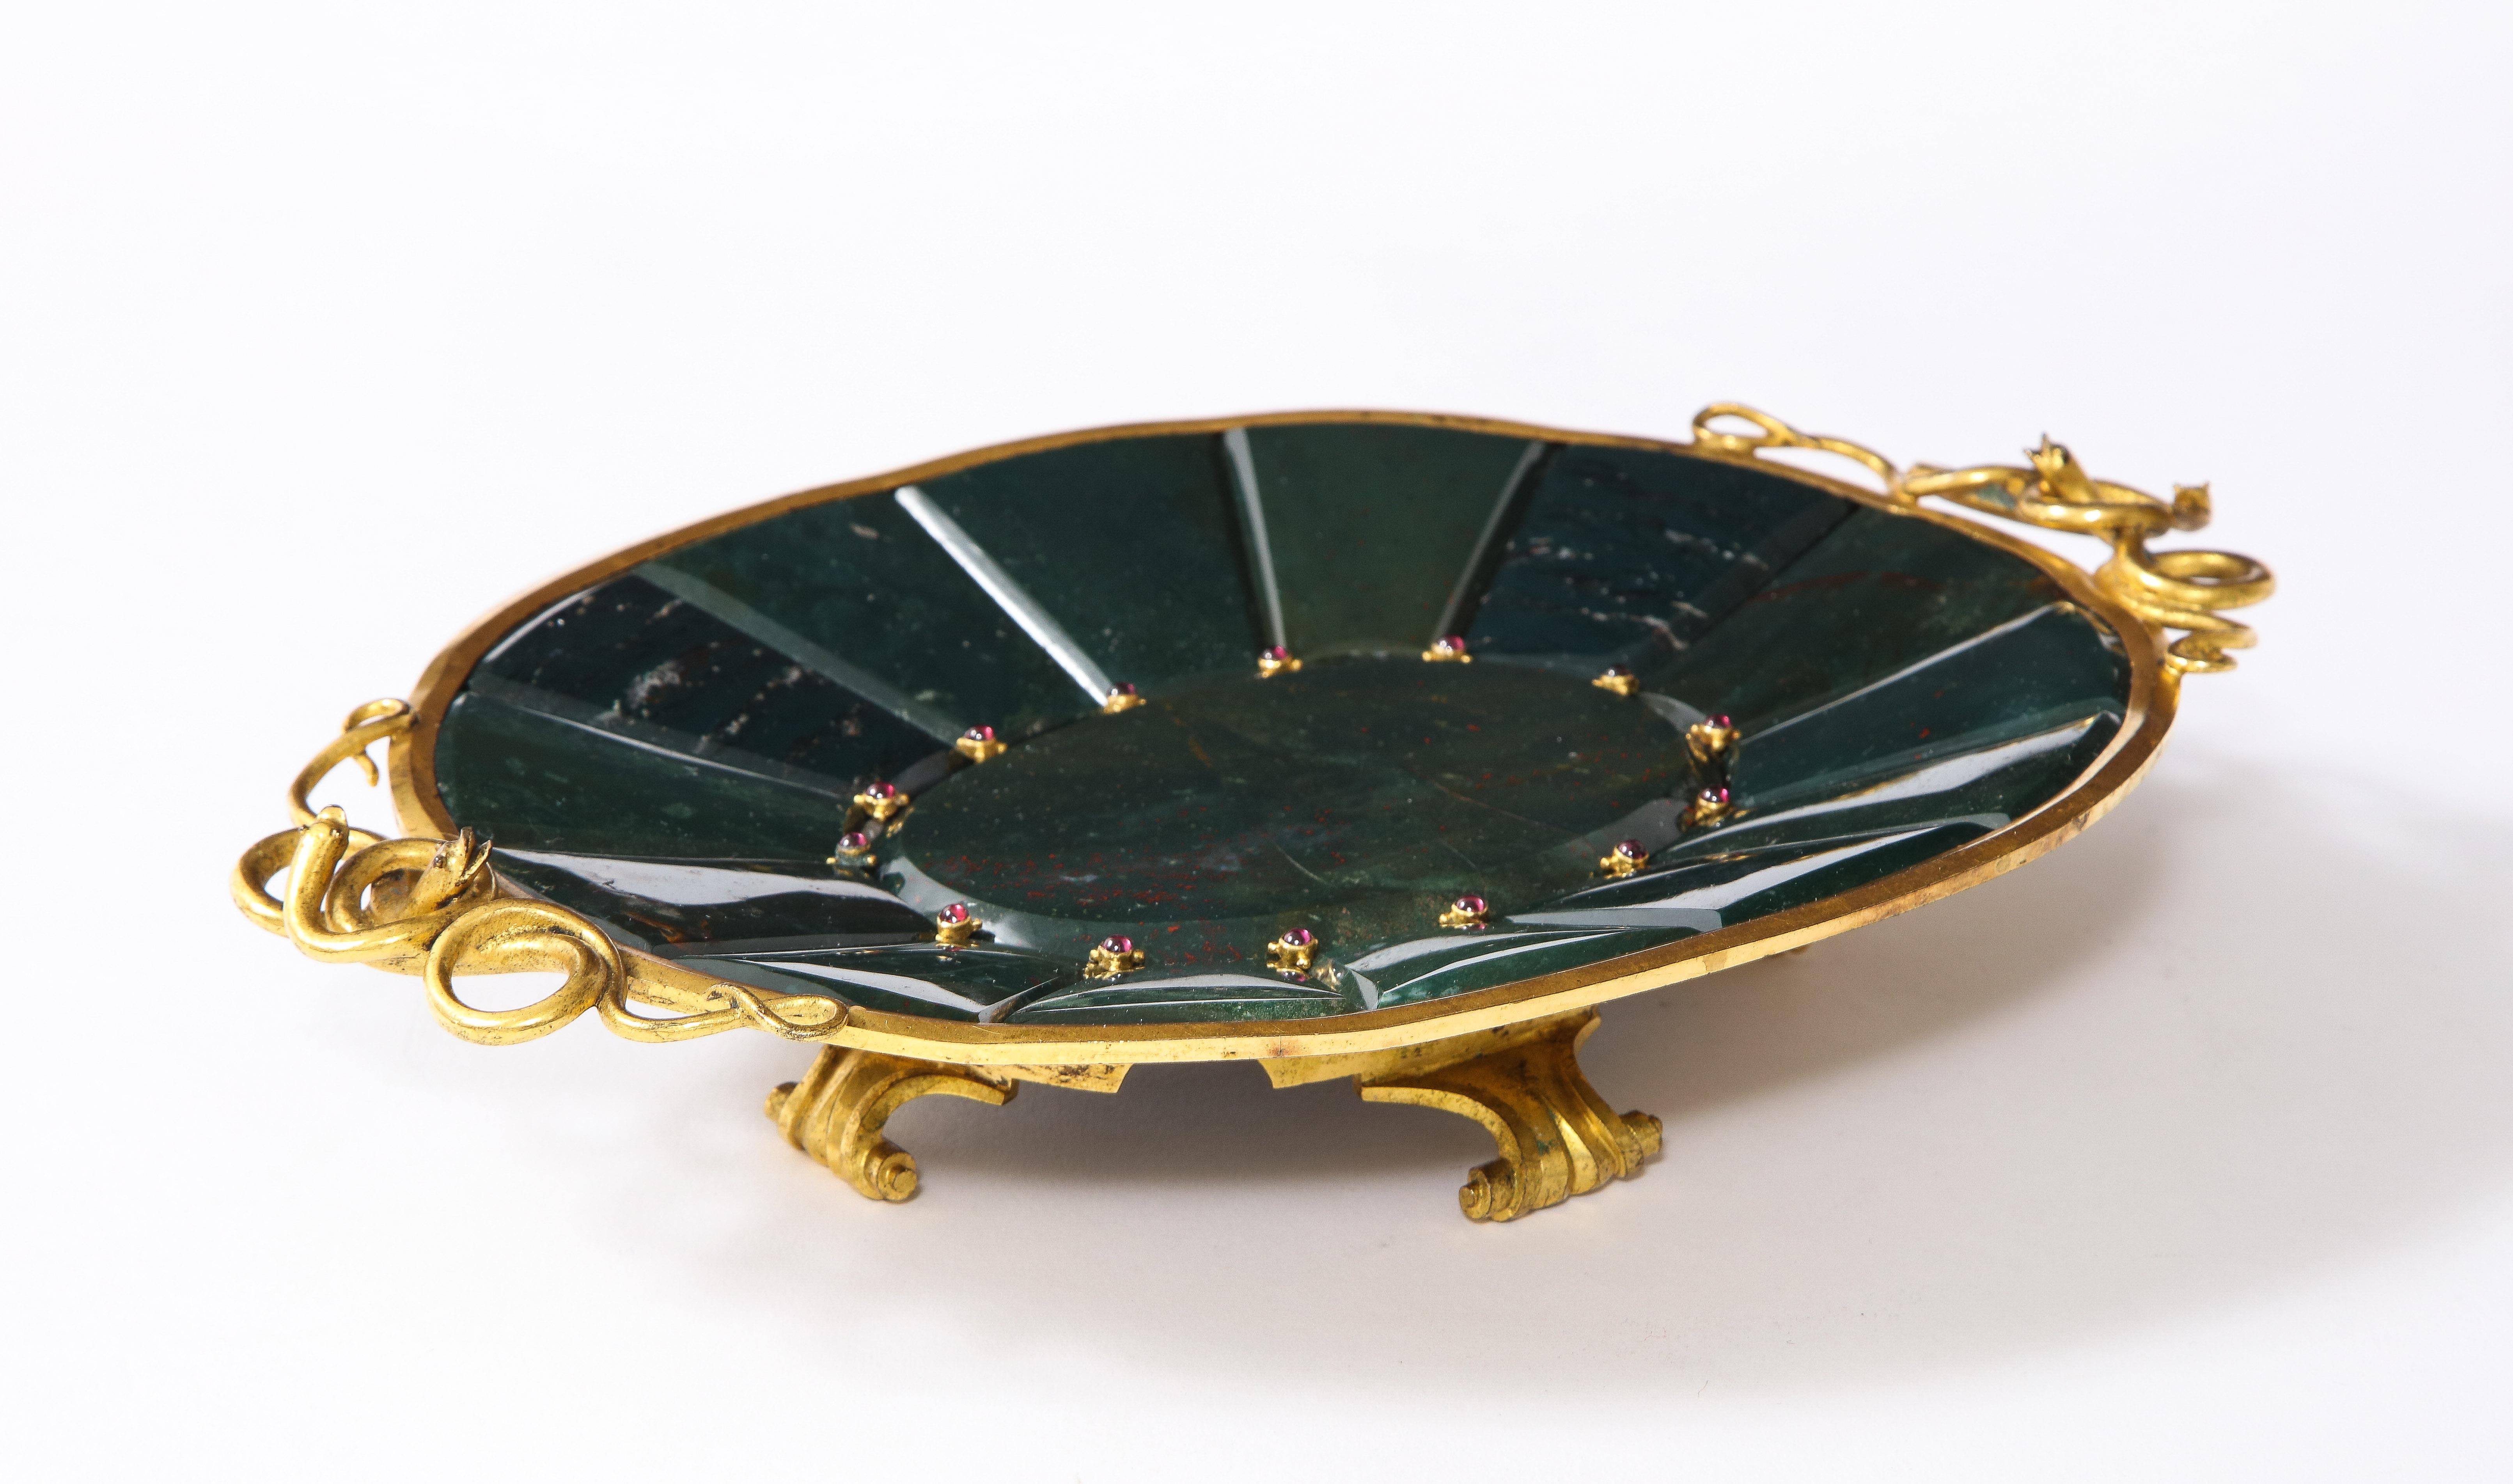 A magnificent 19th century Louis XVI style Russian Dore bronze and jewel mounted bloodstone jasper tray/decorative dish/centerpiece. This is an extraordinary quality object de virtue and is made with one of the rarest and most beautiful stones,